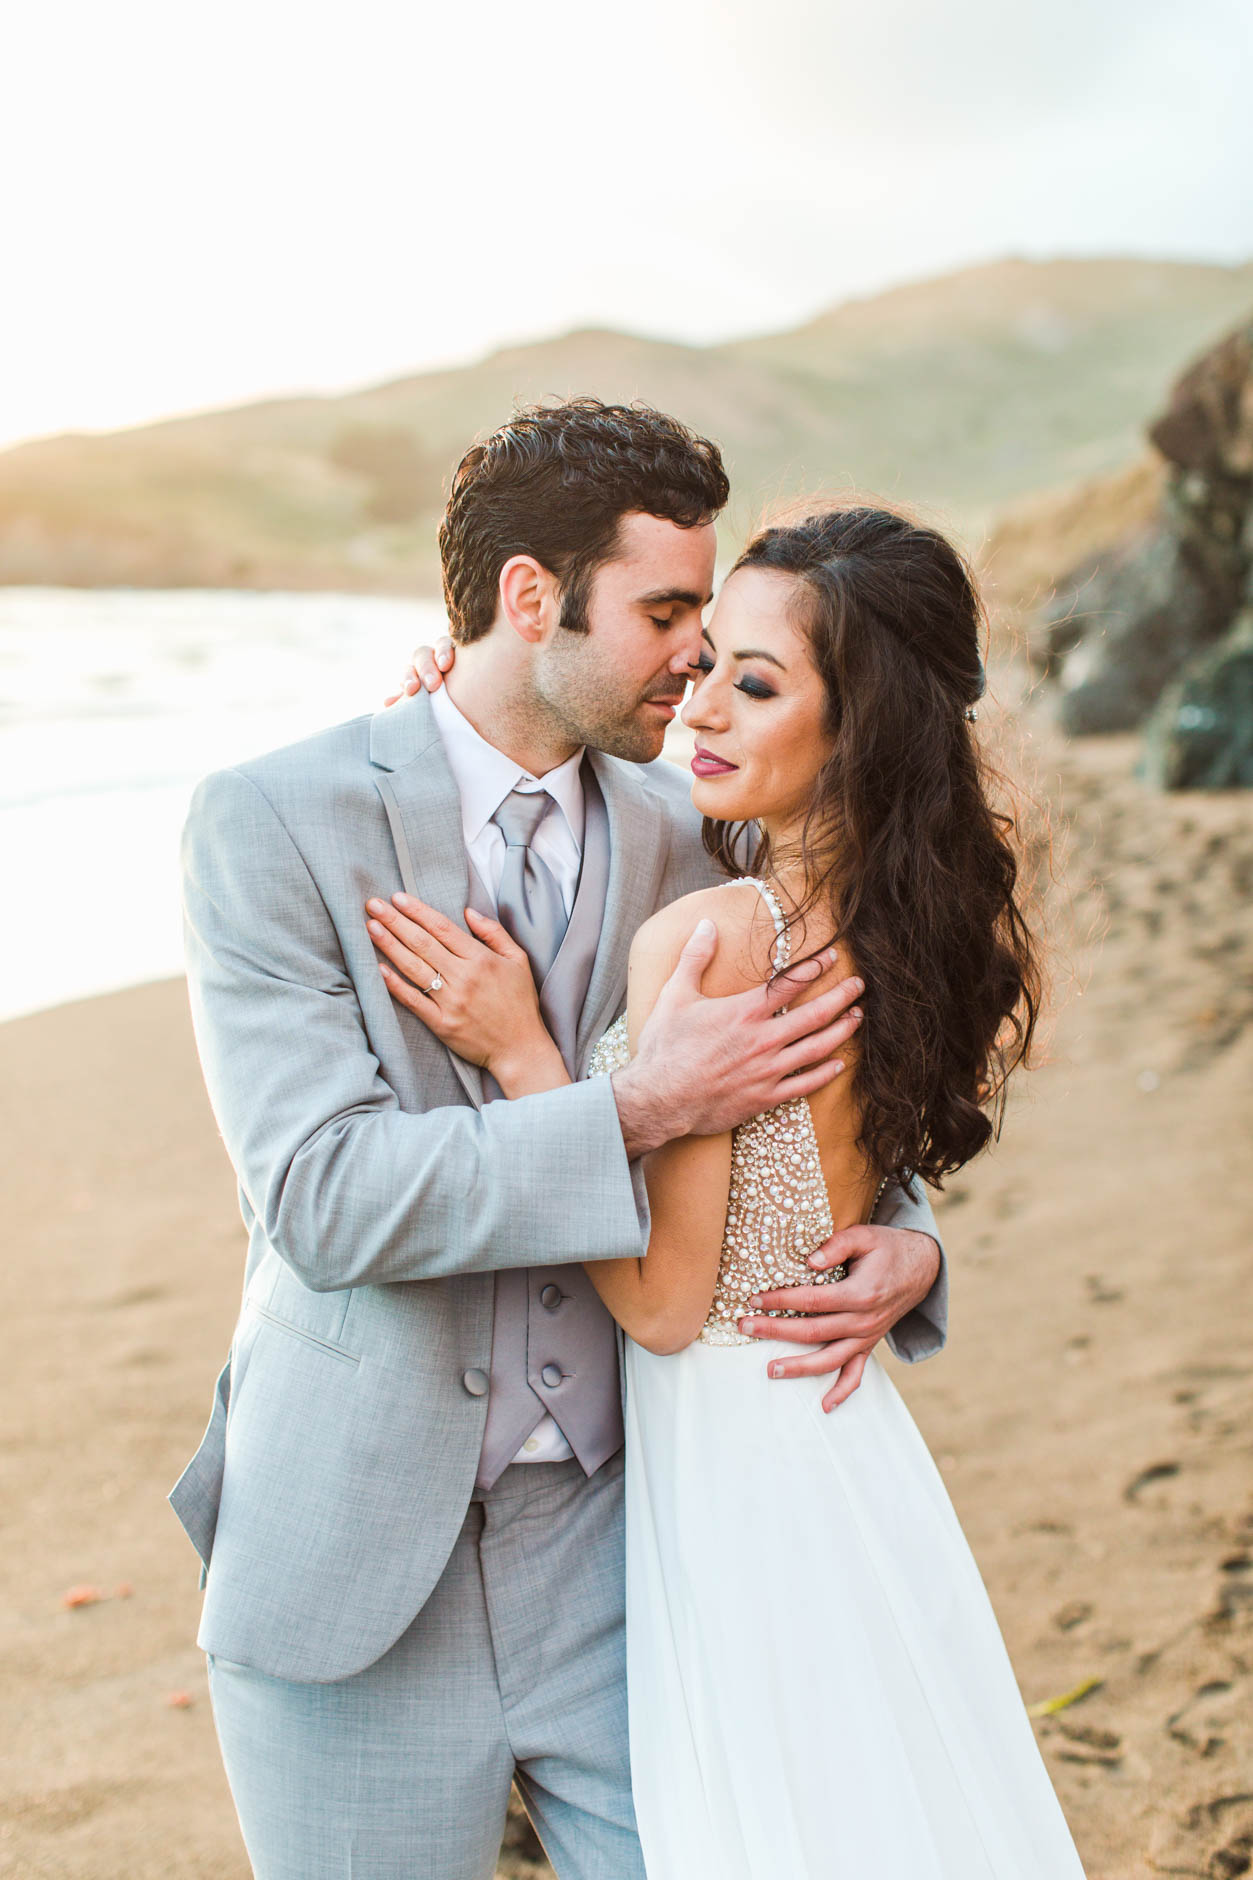 Intimate bride and groom portrait during windswept elopement